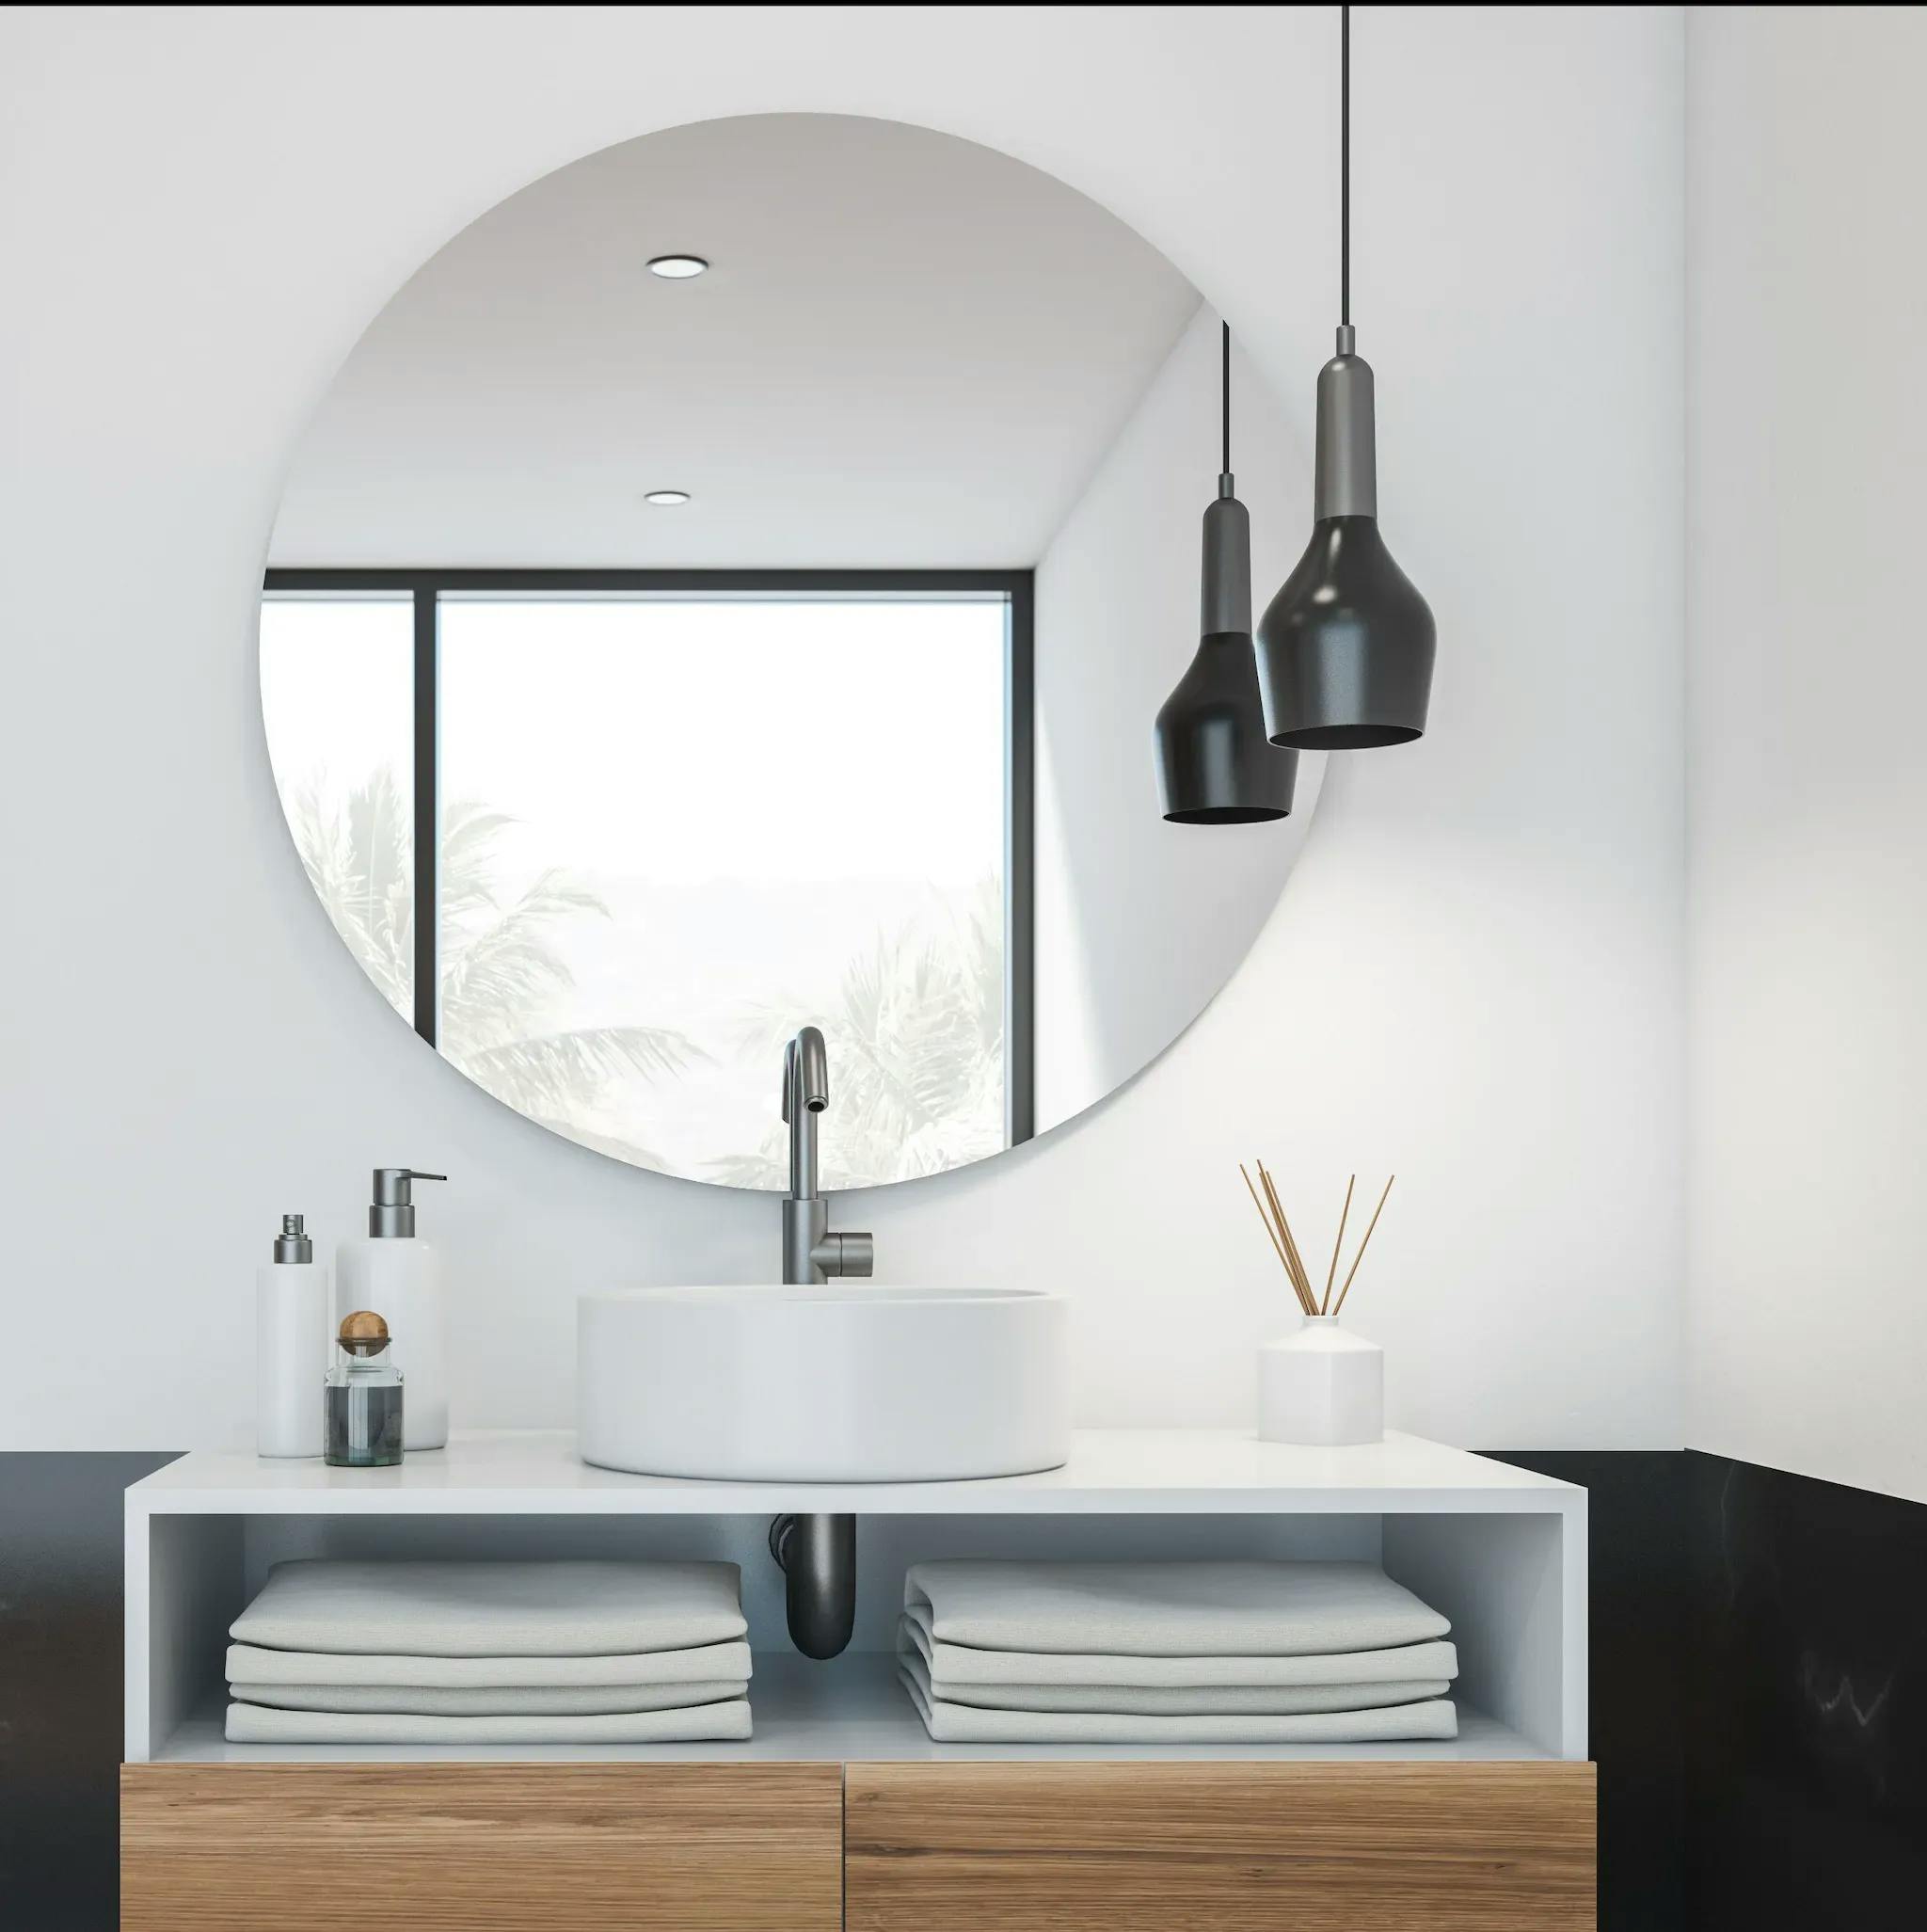 Round mirror on a bathroom vanity, with a sink in view and a hanging lamp suspended from the ceiling